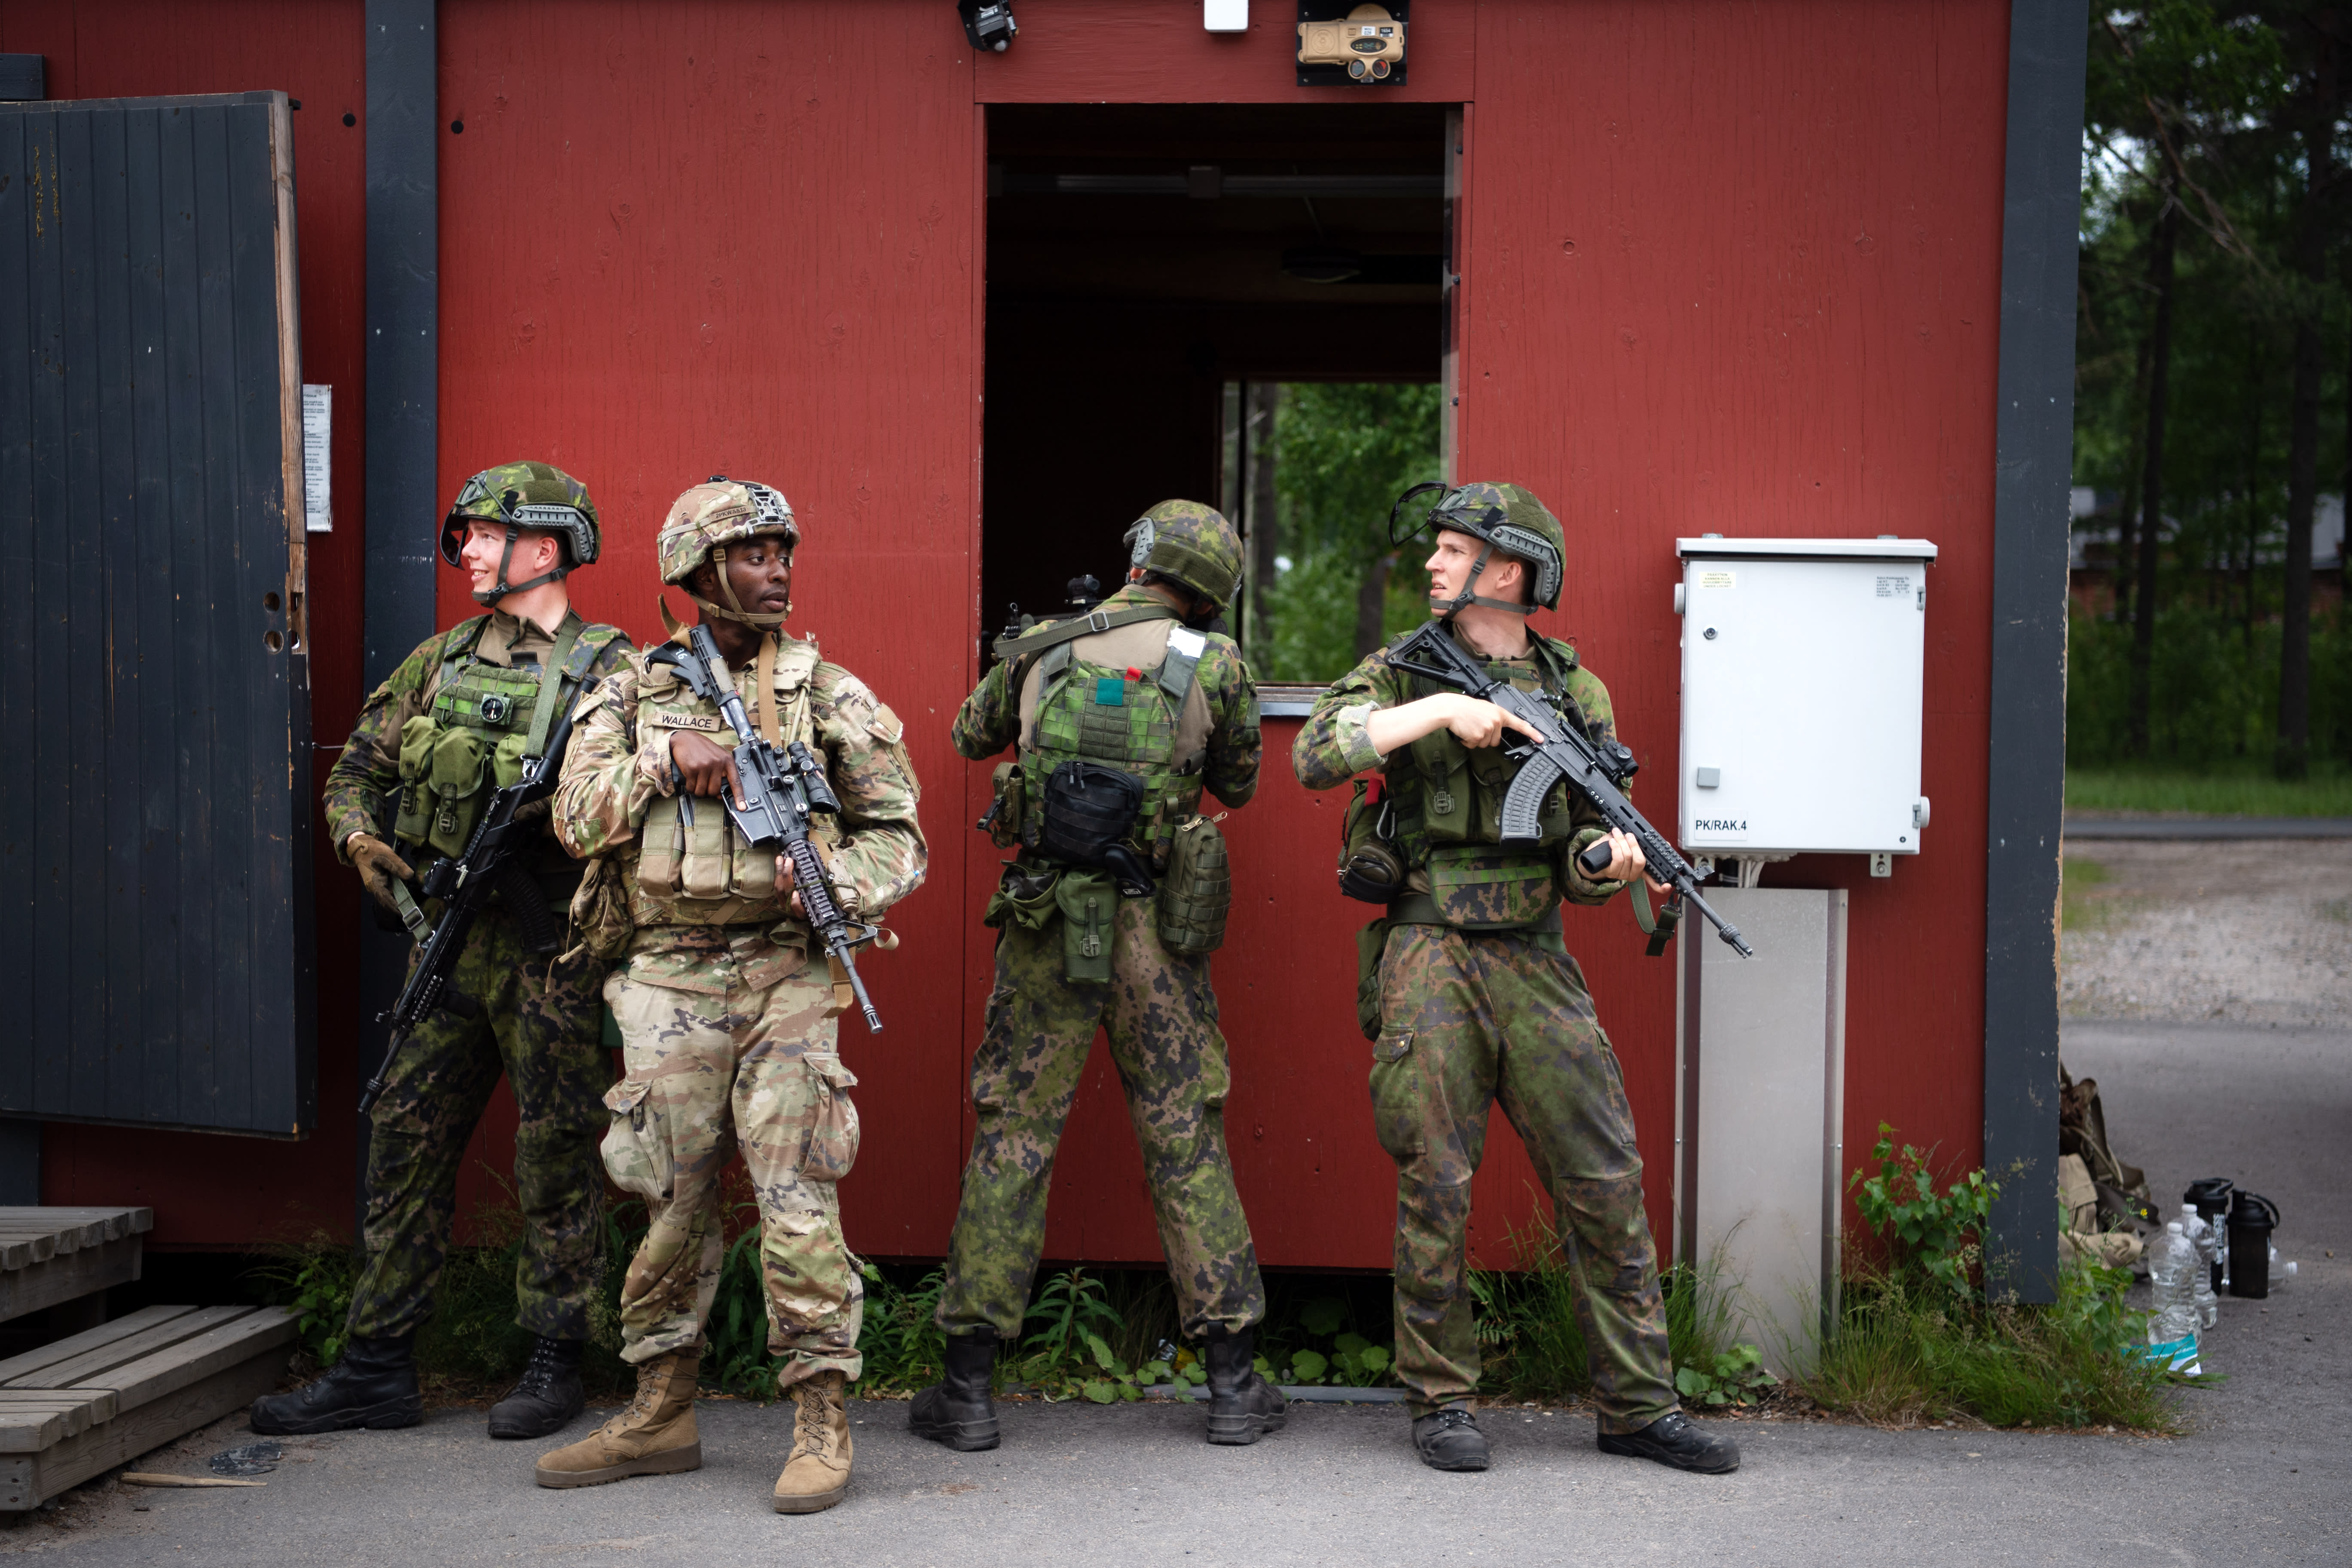 US soldiers are training with Finnish troops in Helsinki